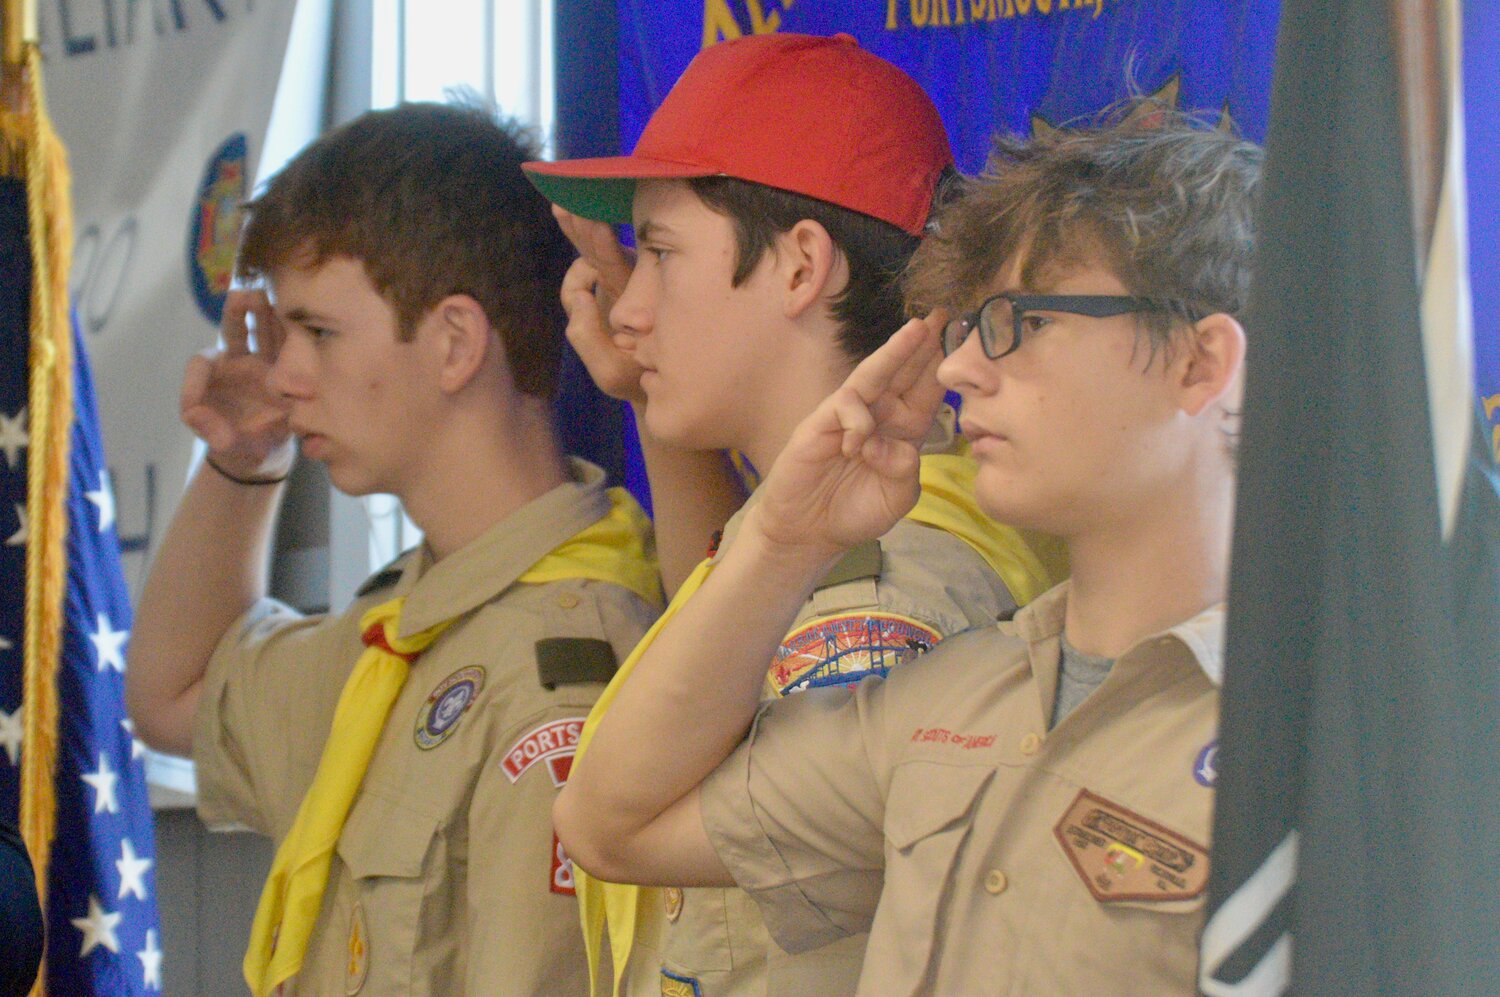 Local Boy Scouts led the Pledge of Allegiance.